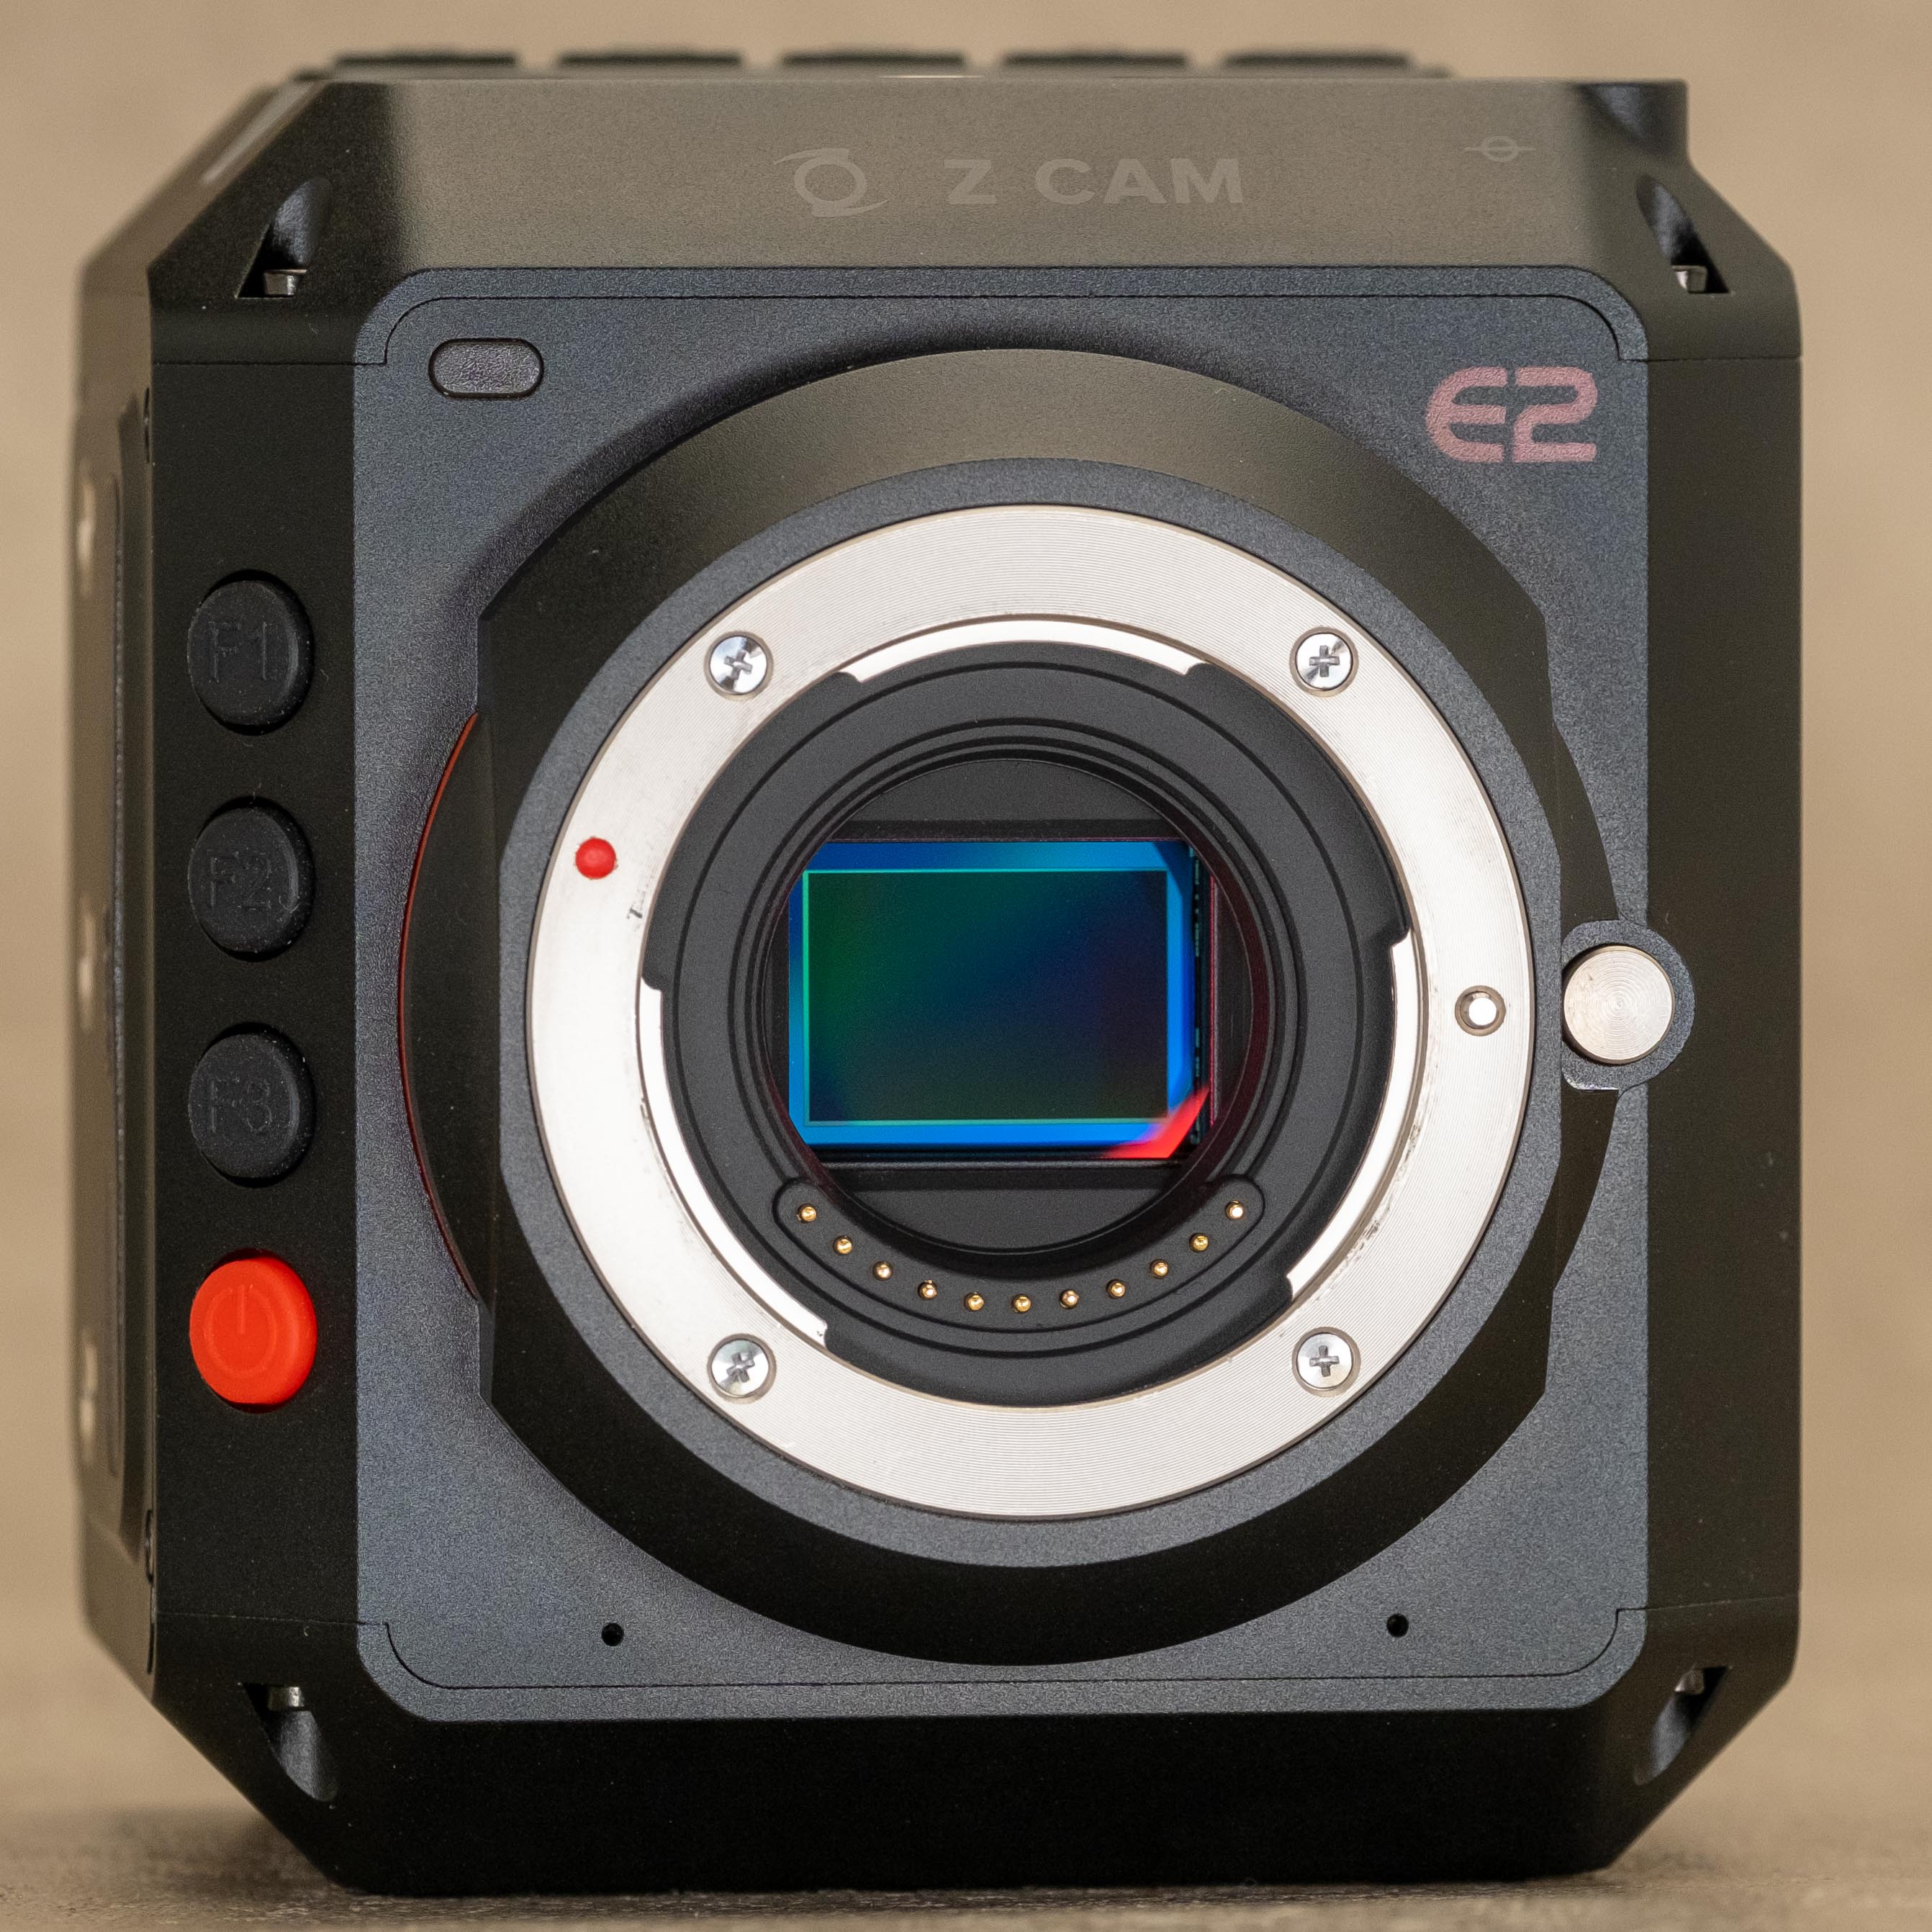 Cam E2 Hands-on review - Newsshooter